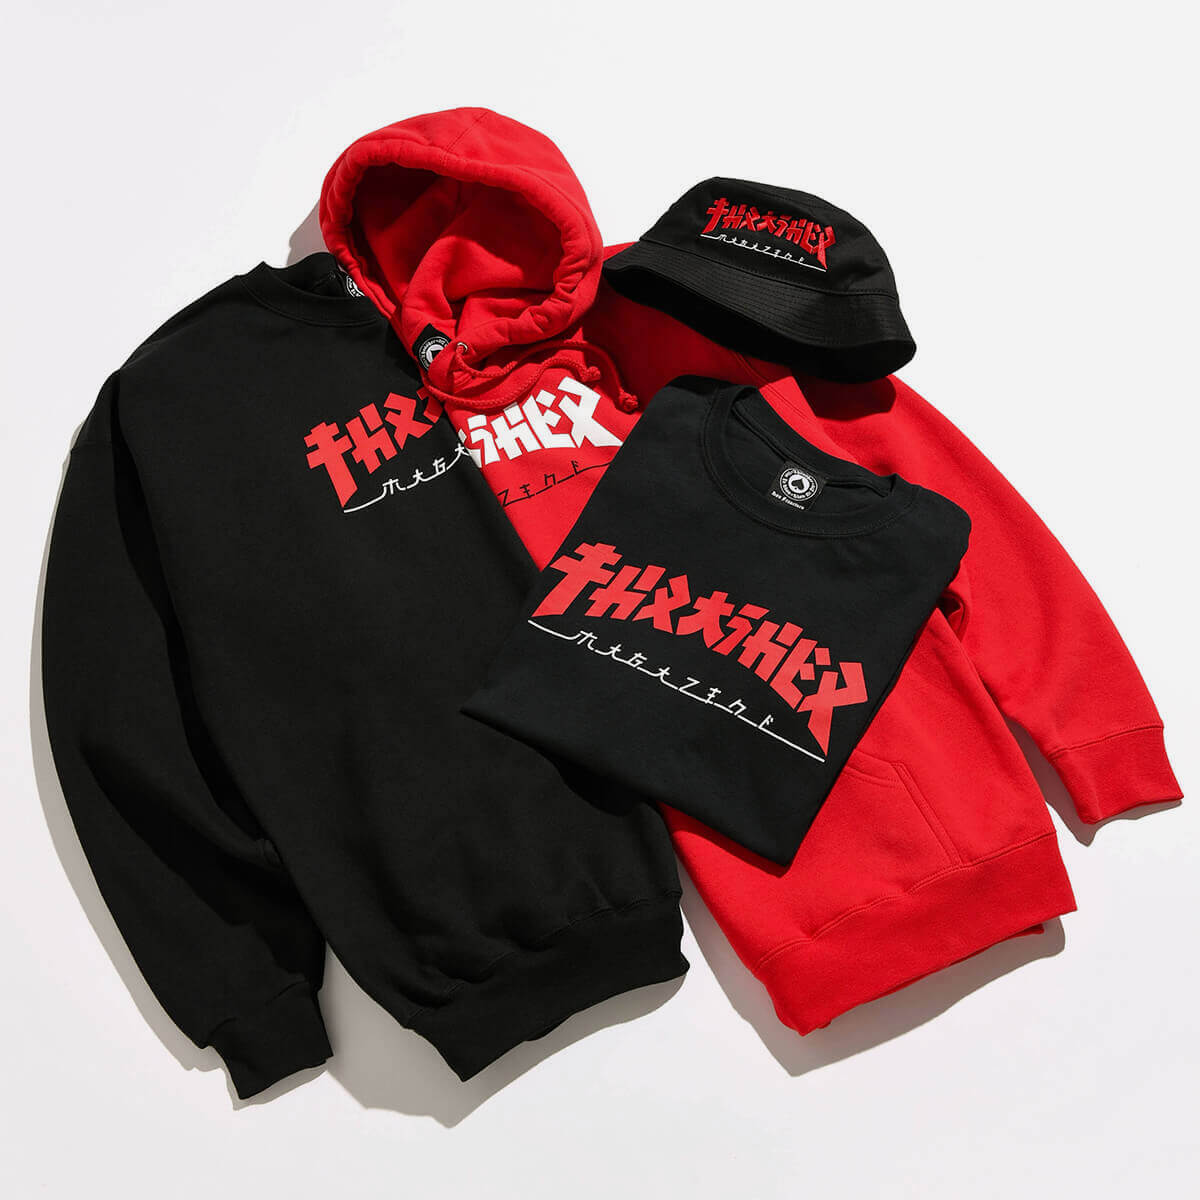 THRASHER HOODIES AND TOP SELLERS